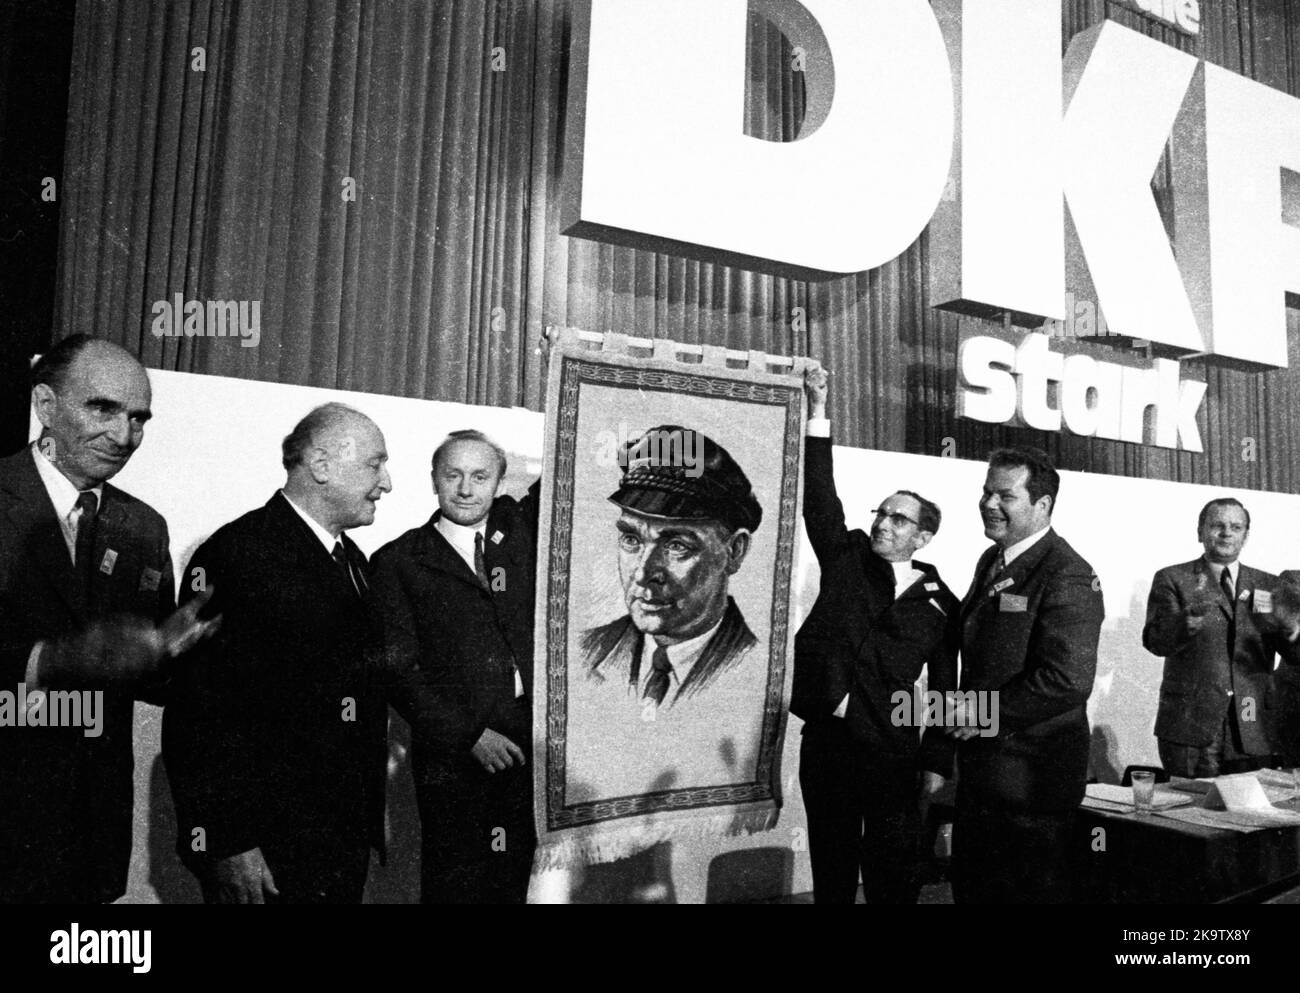 The 2nd Party Congress of the German Communist Party (DKP) was held in Duesseldorf from 25. 11. 1971 to 28. 1971. Kurt Bachman, Albert Norden, N. N. Stock Photo